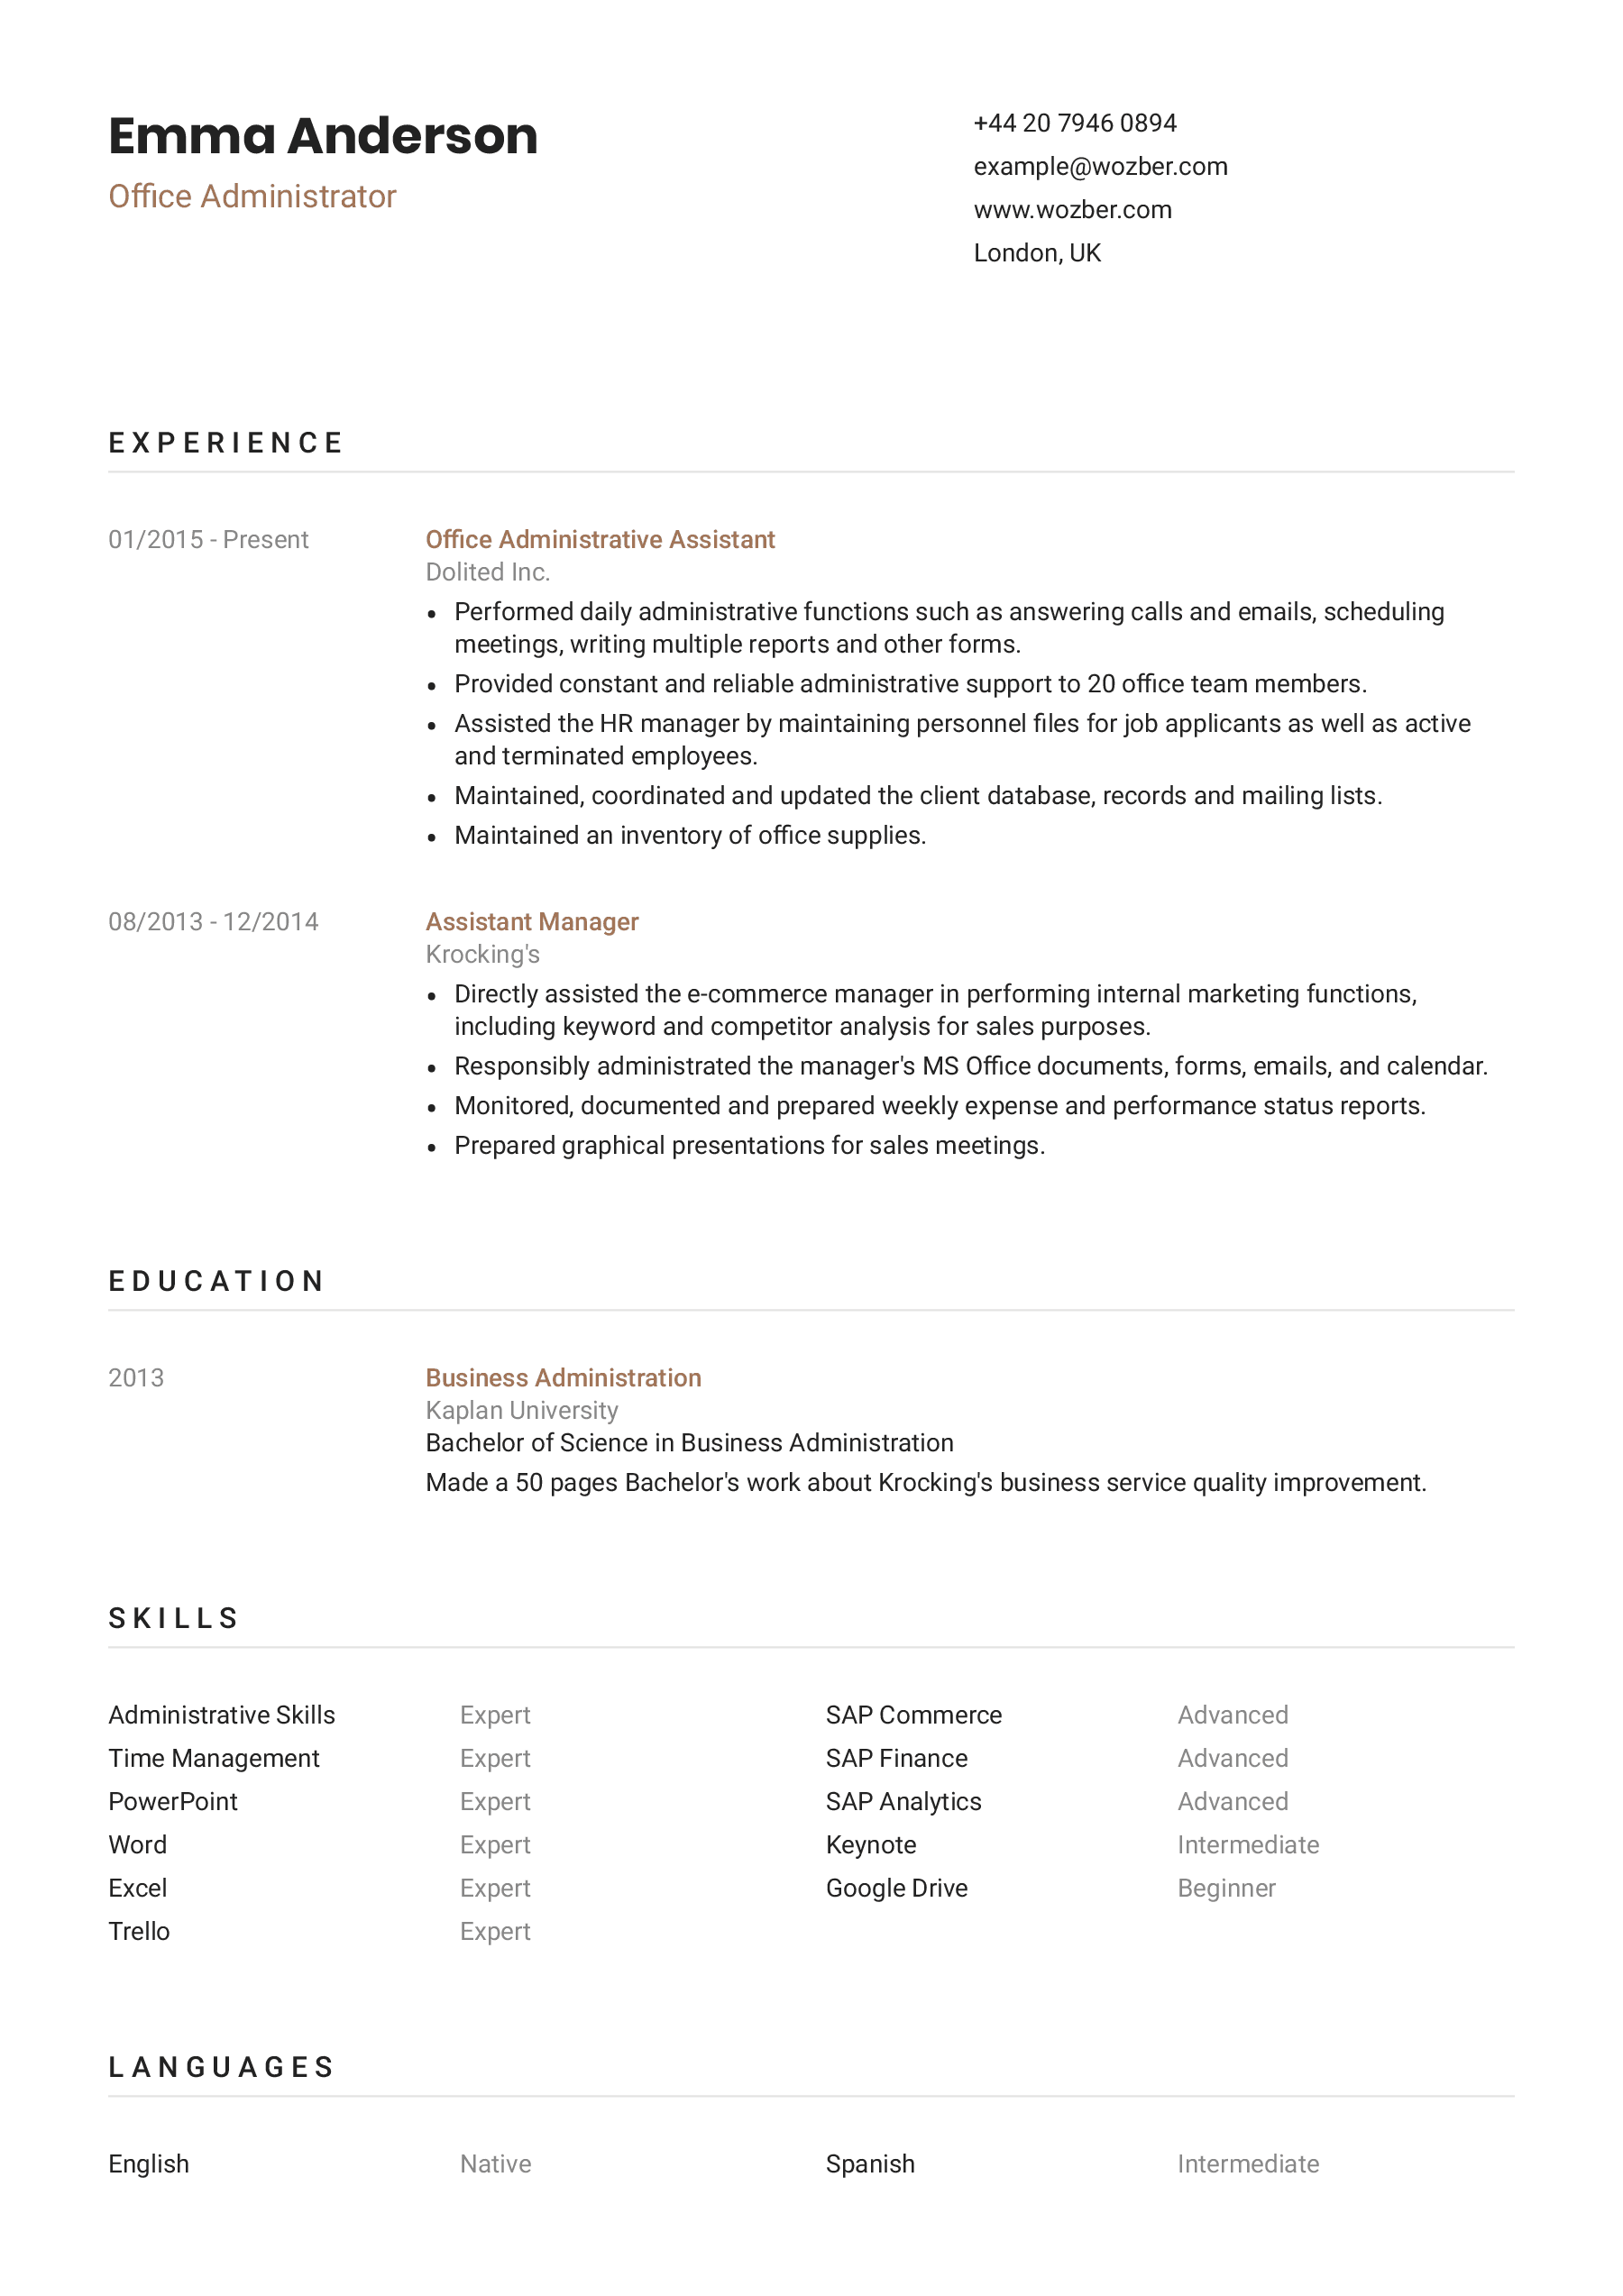 Modern resume example for Office Administrator position